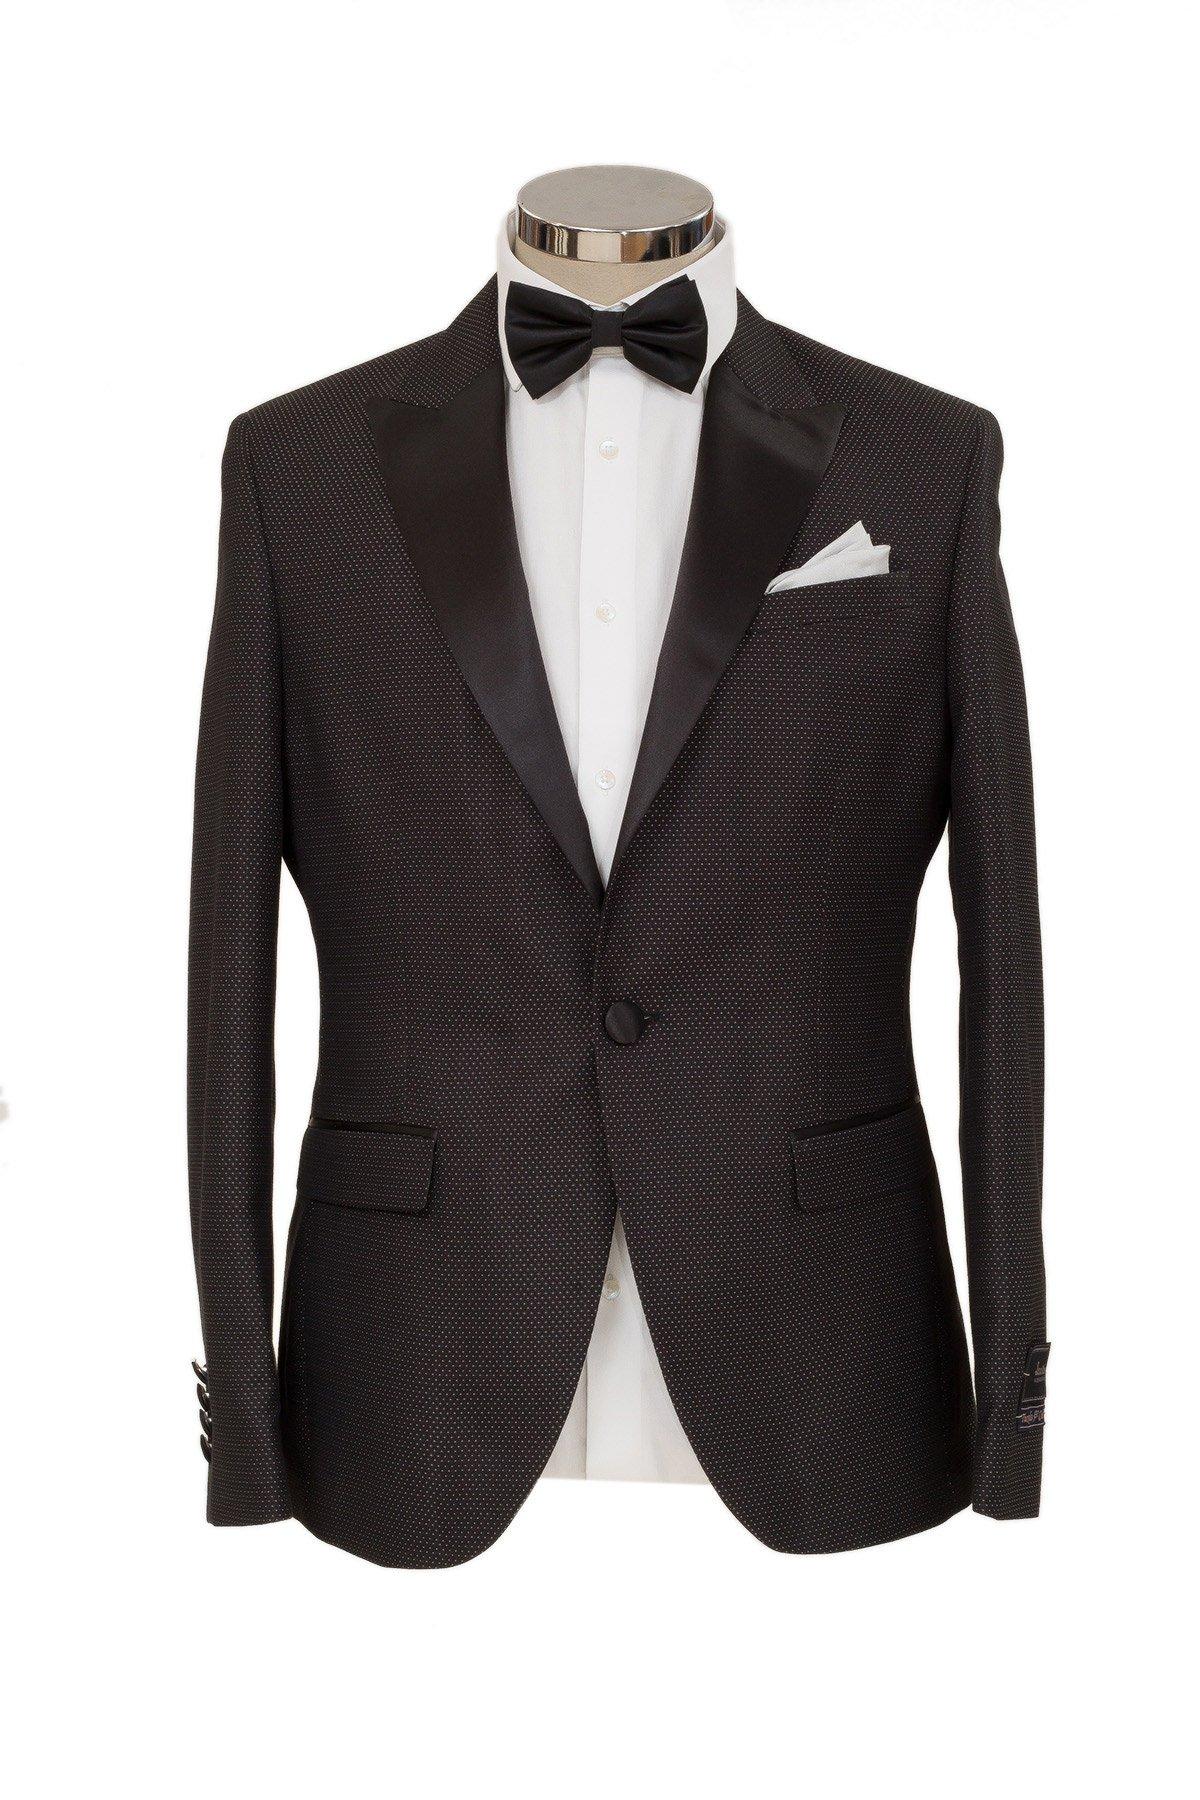 Maroon Colored Textured Finish Ceremony Suit